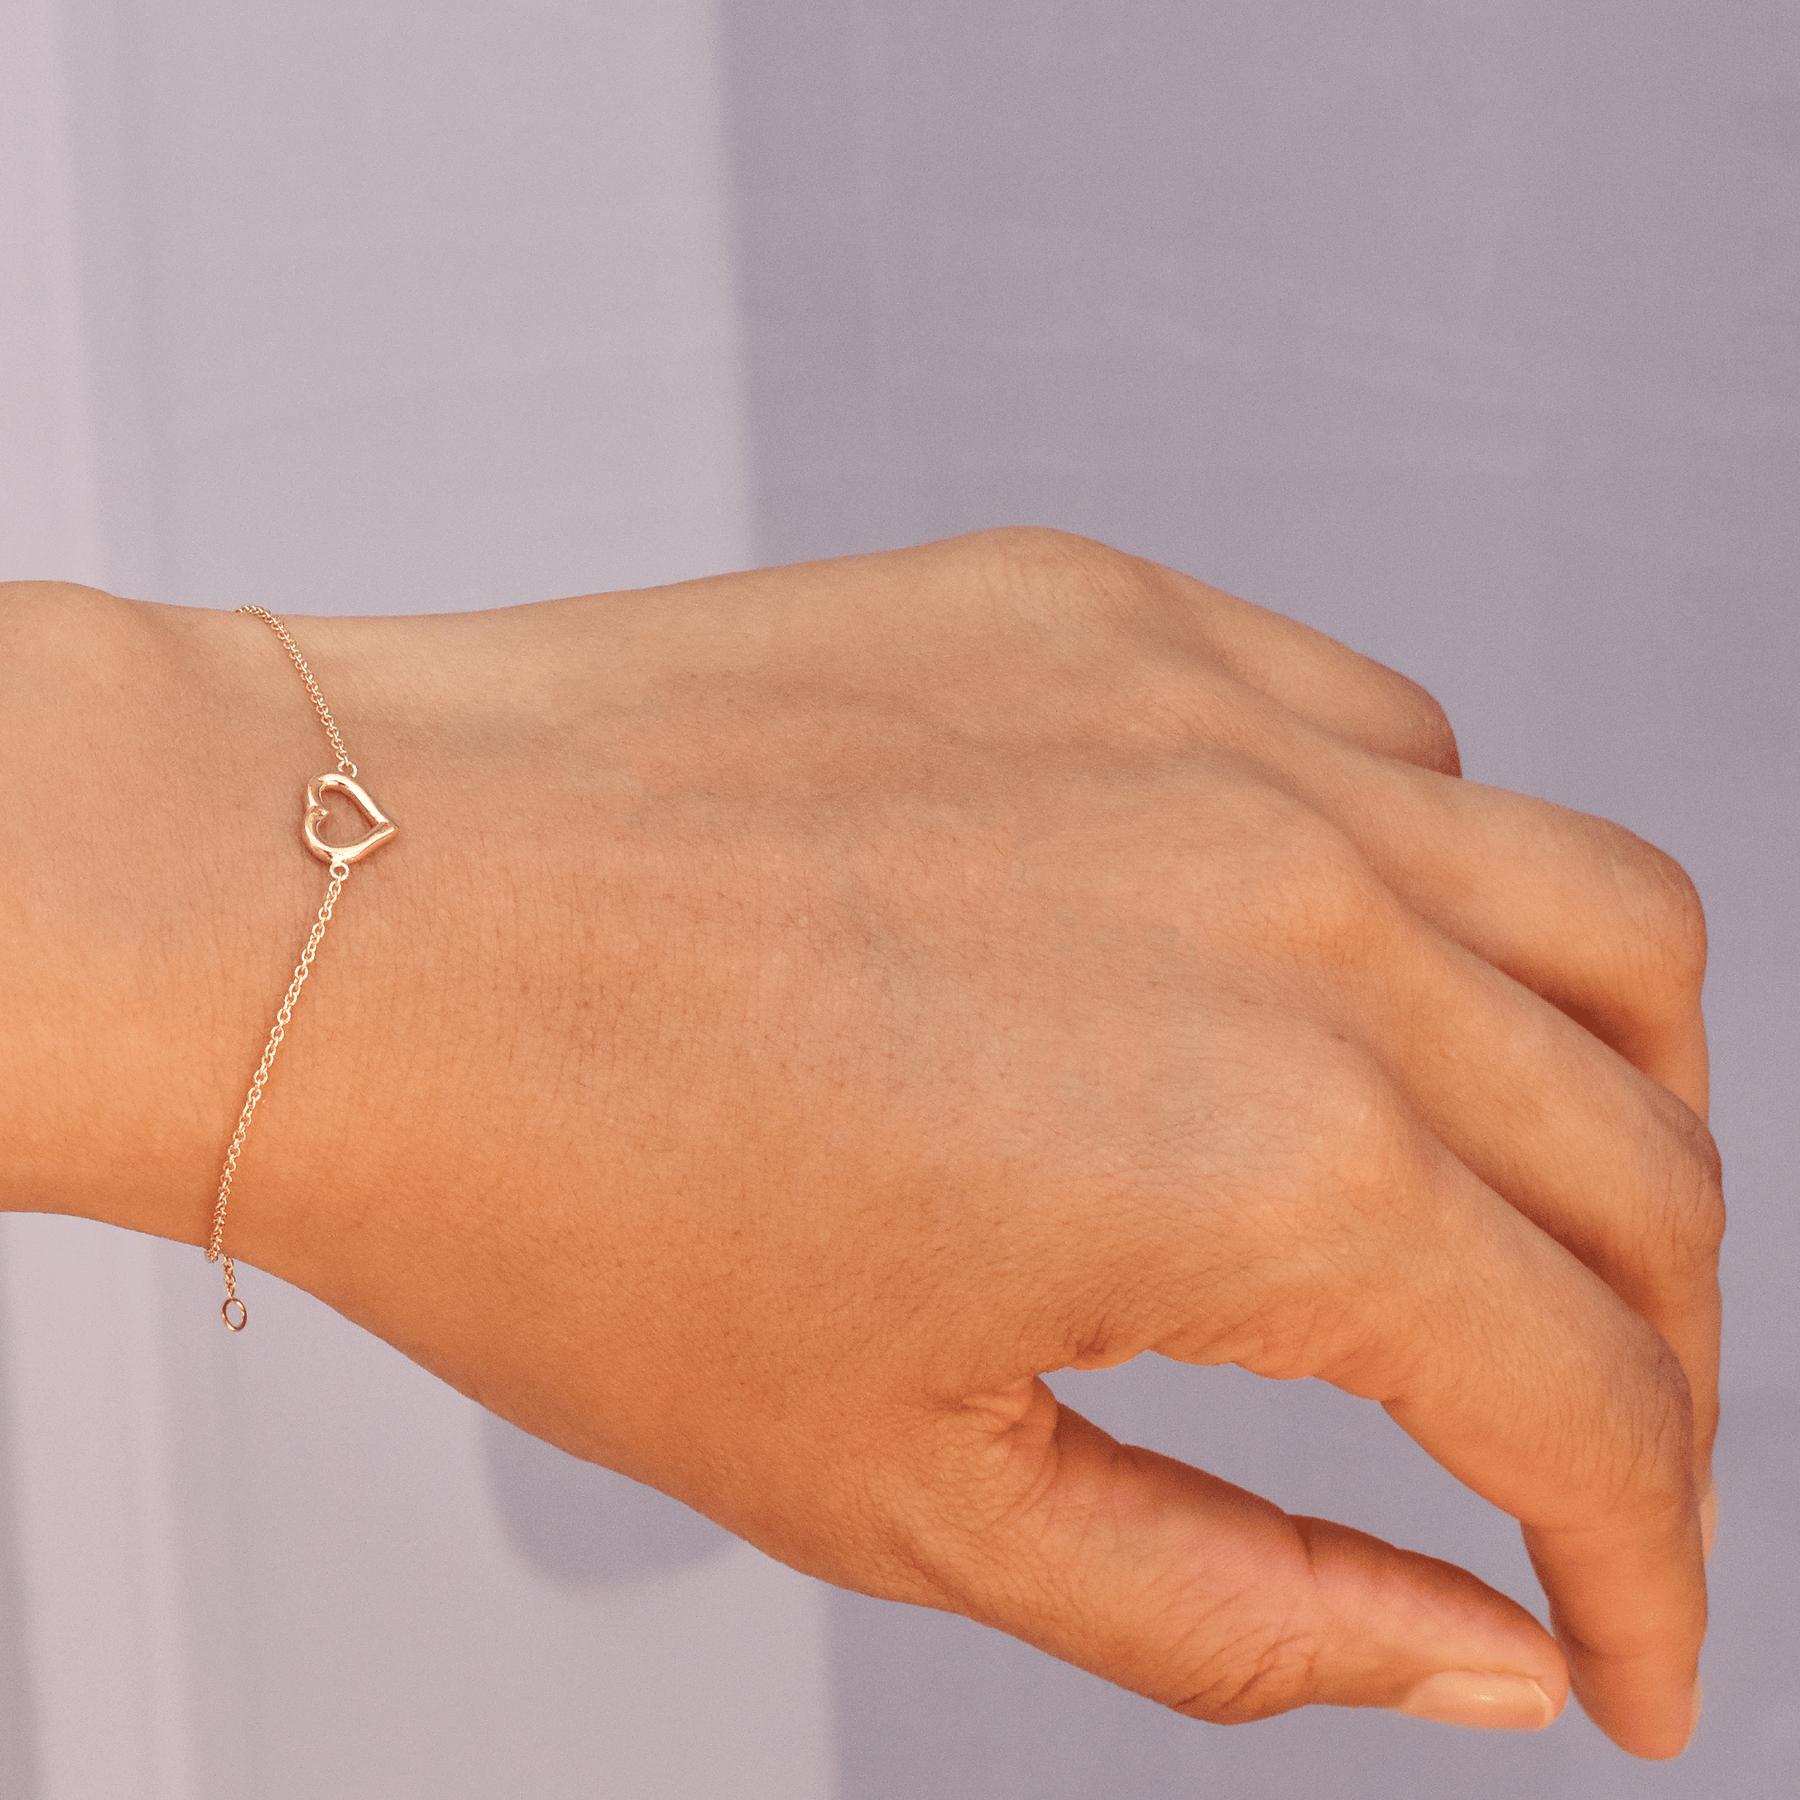 Accessories For Women Charm Adjustable Bracelet For Women Gold Color Chain  Bracelet Girls Fashion Wedding Party Jewelry Gifts - Bracelets - AliExpress